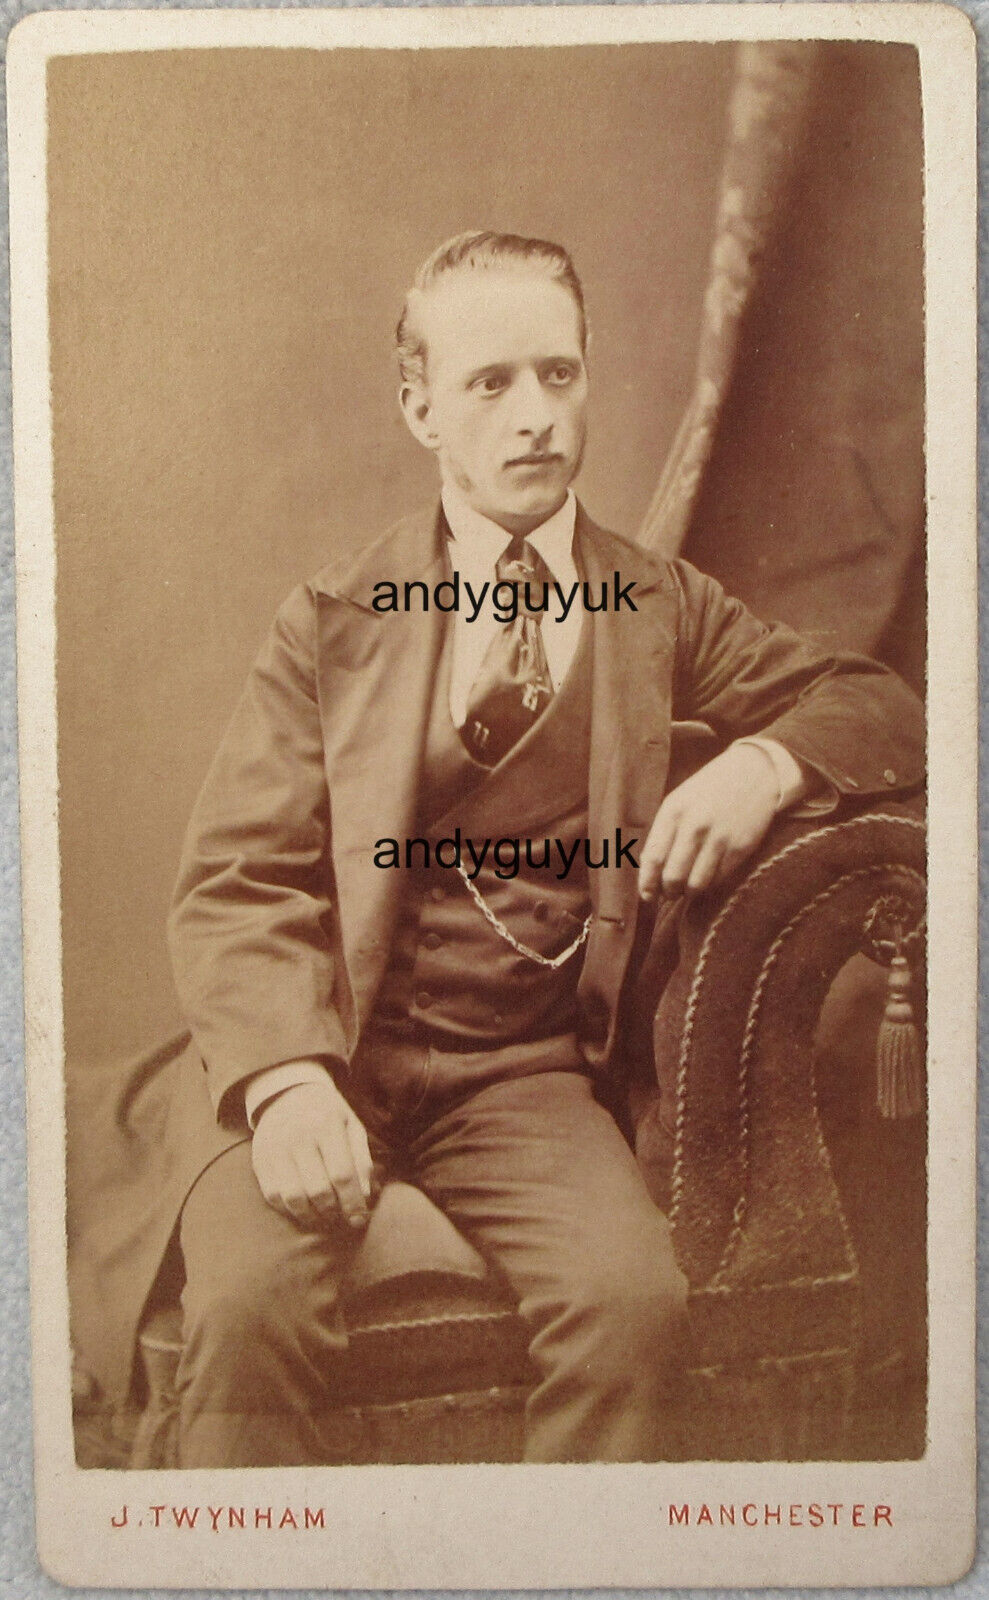 CDV SEATED MAN TWYNHAM MANCHESTER PICTURE FANCY BACK CHAIN TIE ANTIQUE PHOTO